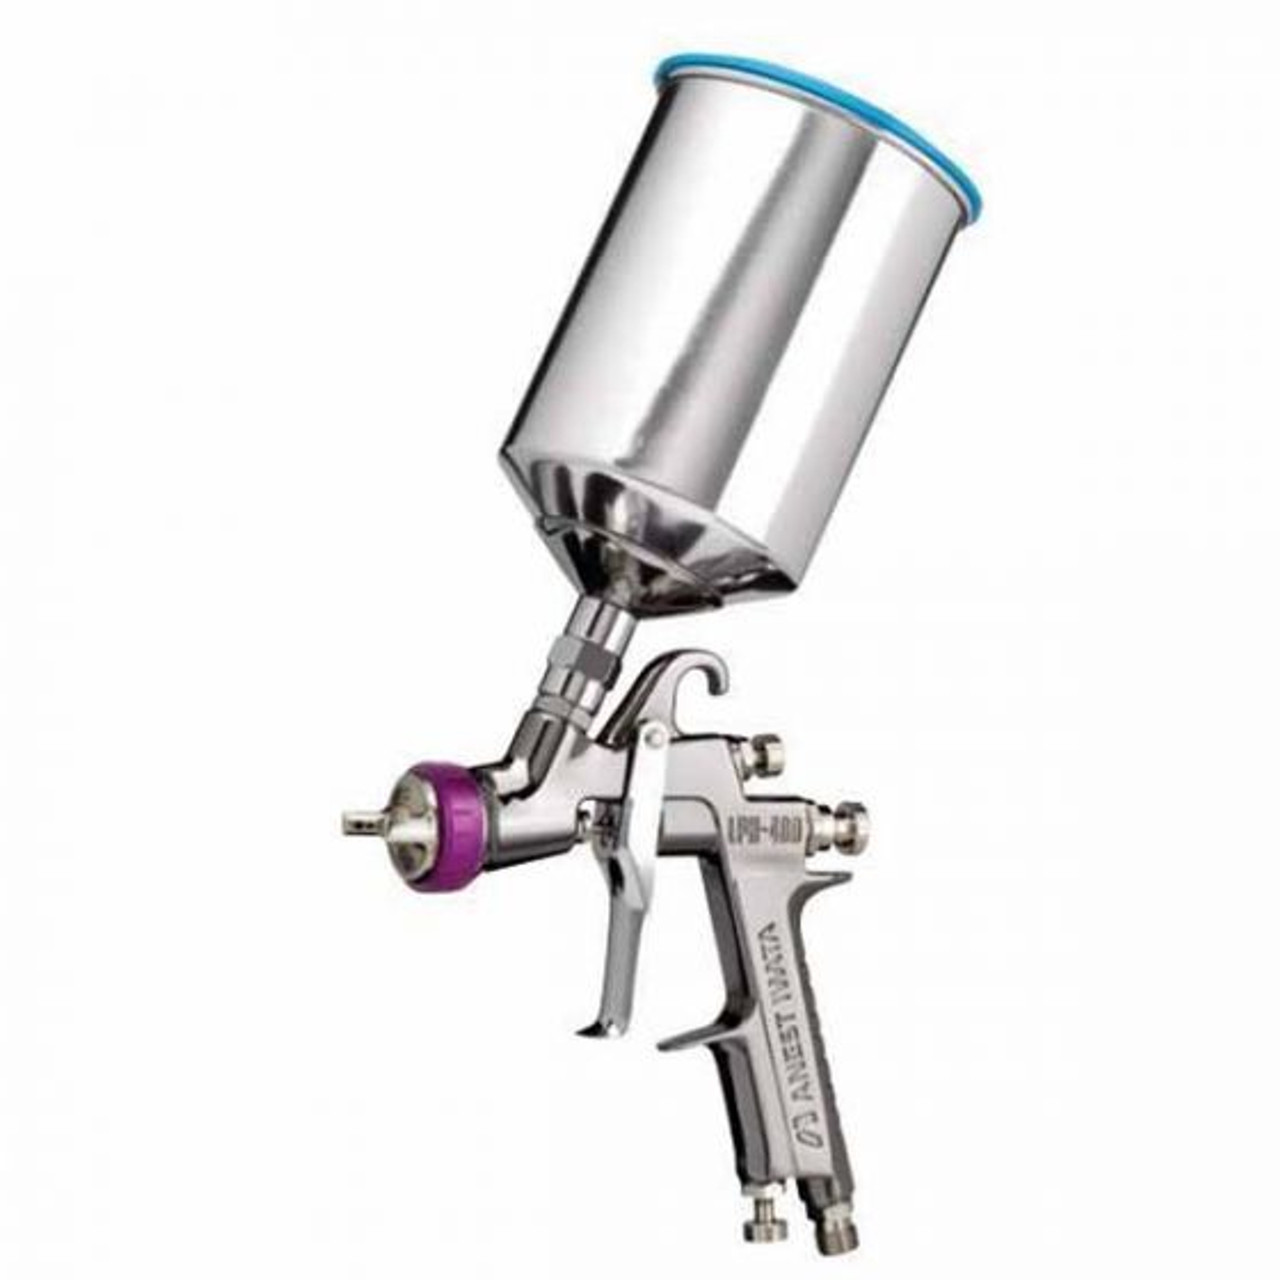 ANEST IWATA 5703 LPH400-LVB Series HVLP Gravity Feed Spray Gun with Cup, 1.3 mm Nozzle, 1000 mL Capacity